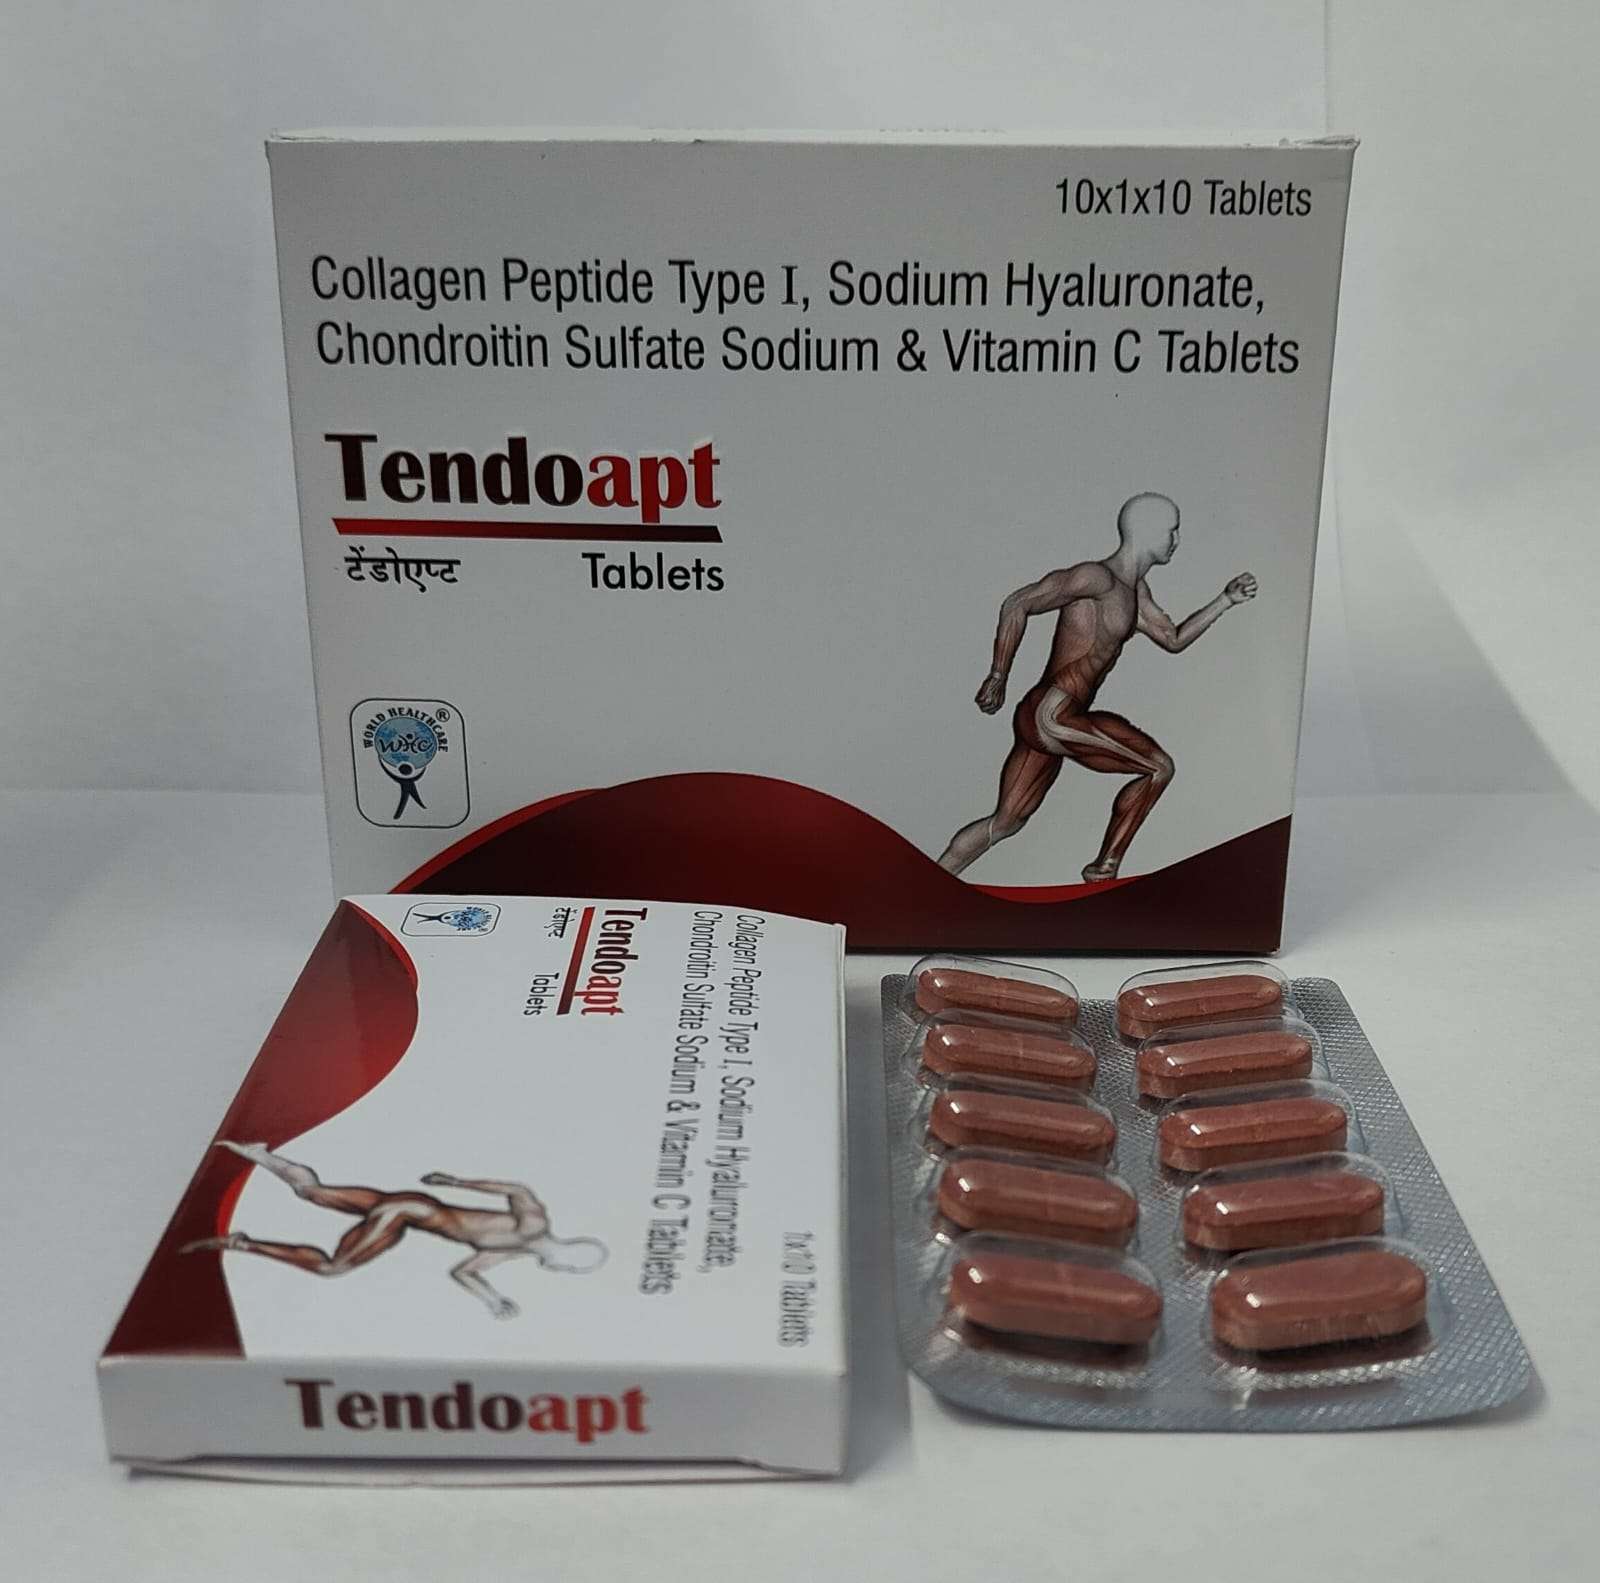 collagen peptide type i 40mg + sodium hyaluronate 30mg + chondroitin sulfate sodium 200mg + vitamin c 35mg tablets